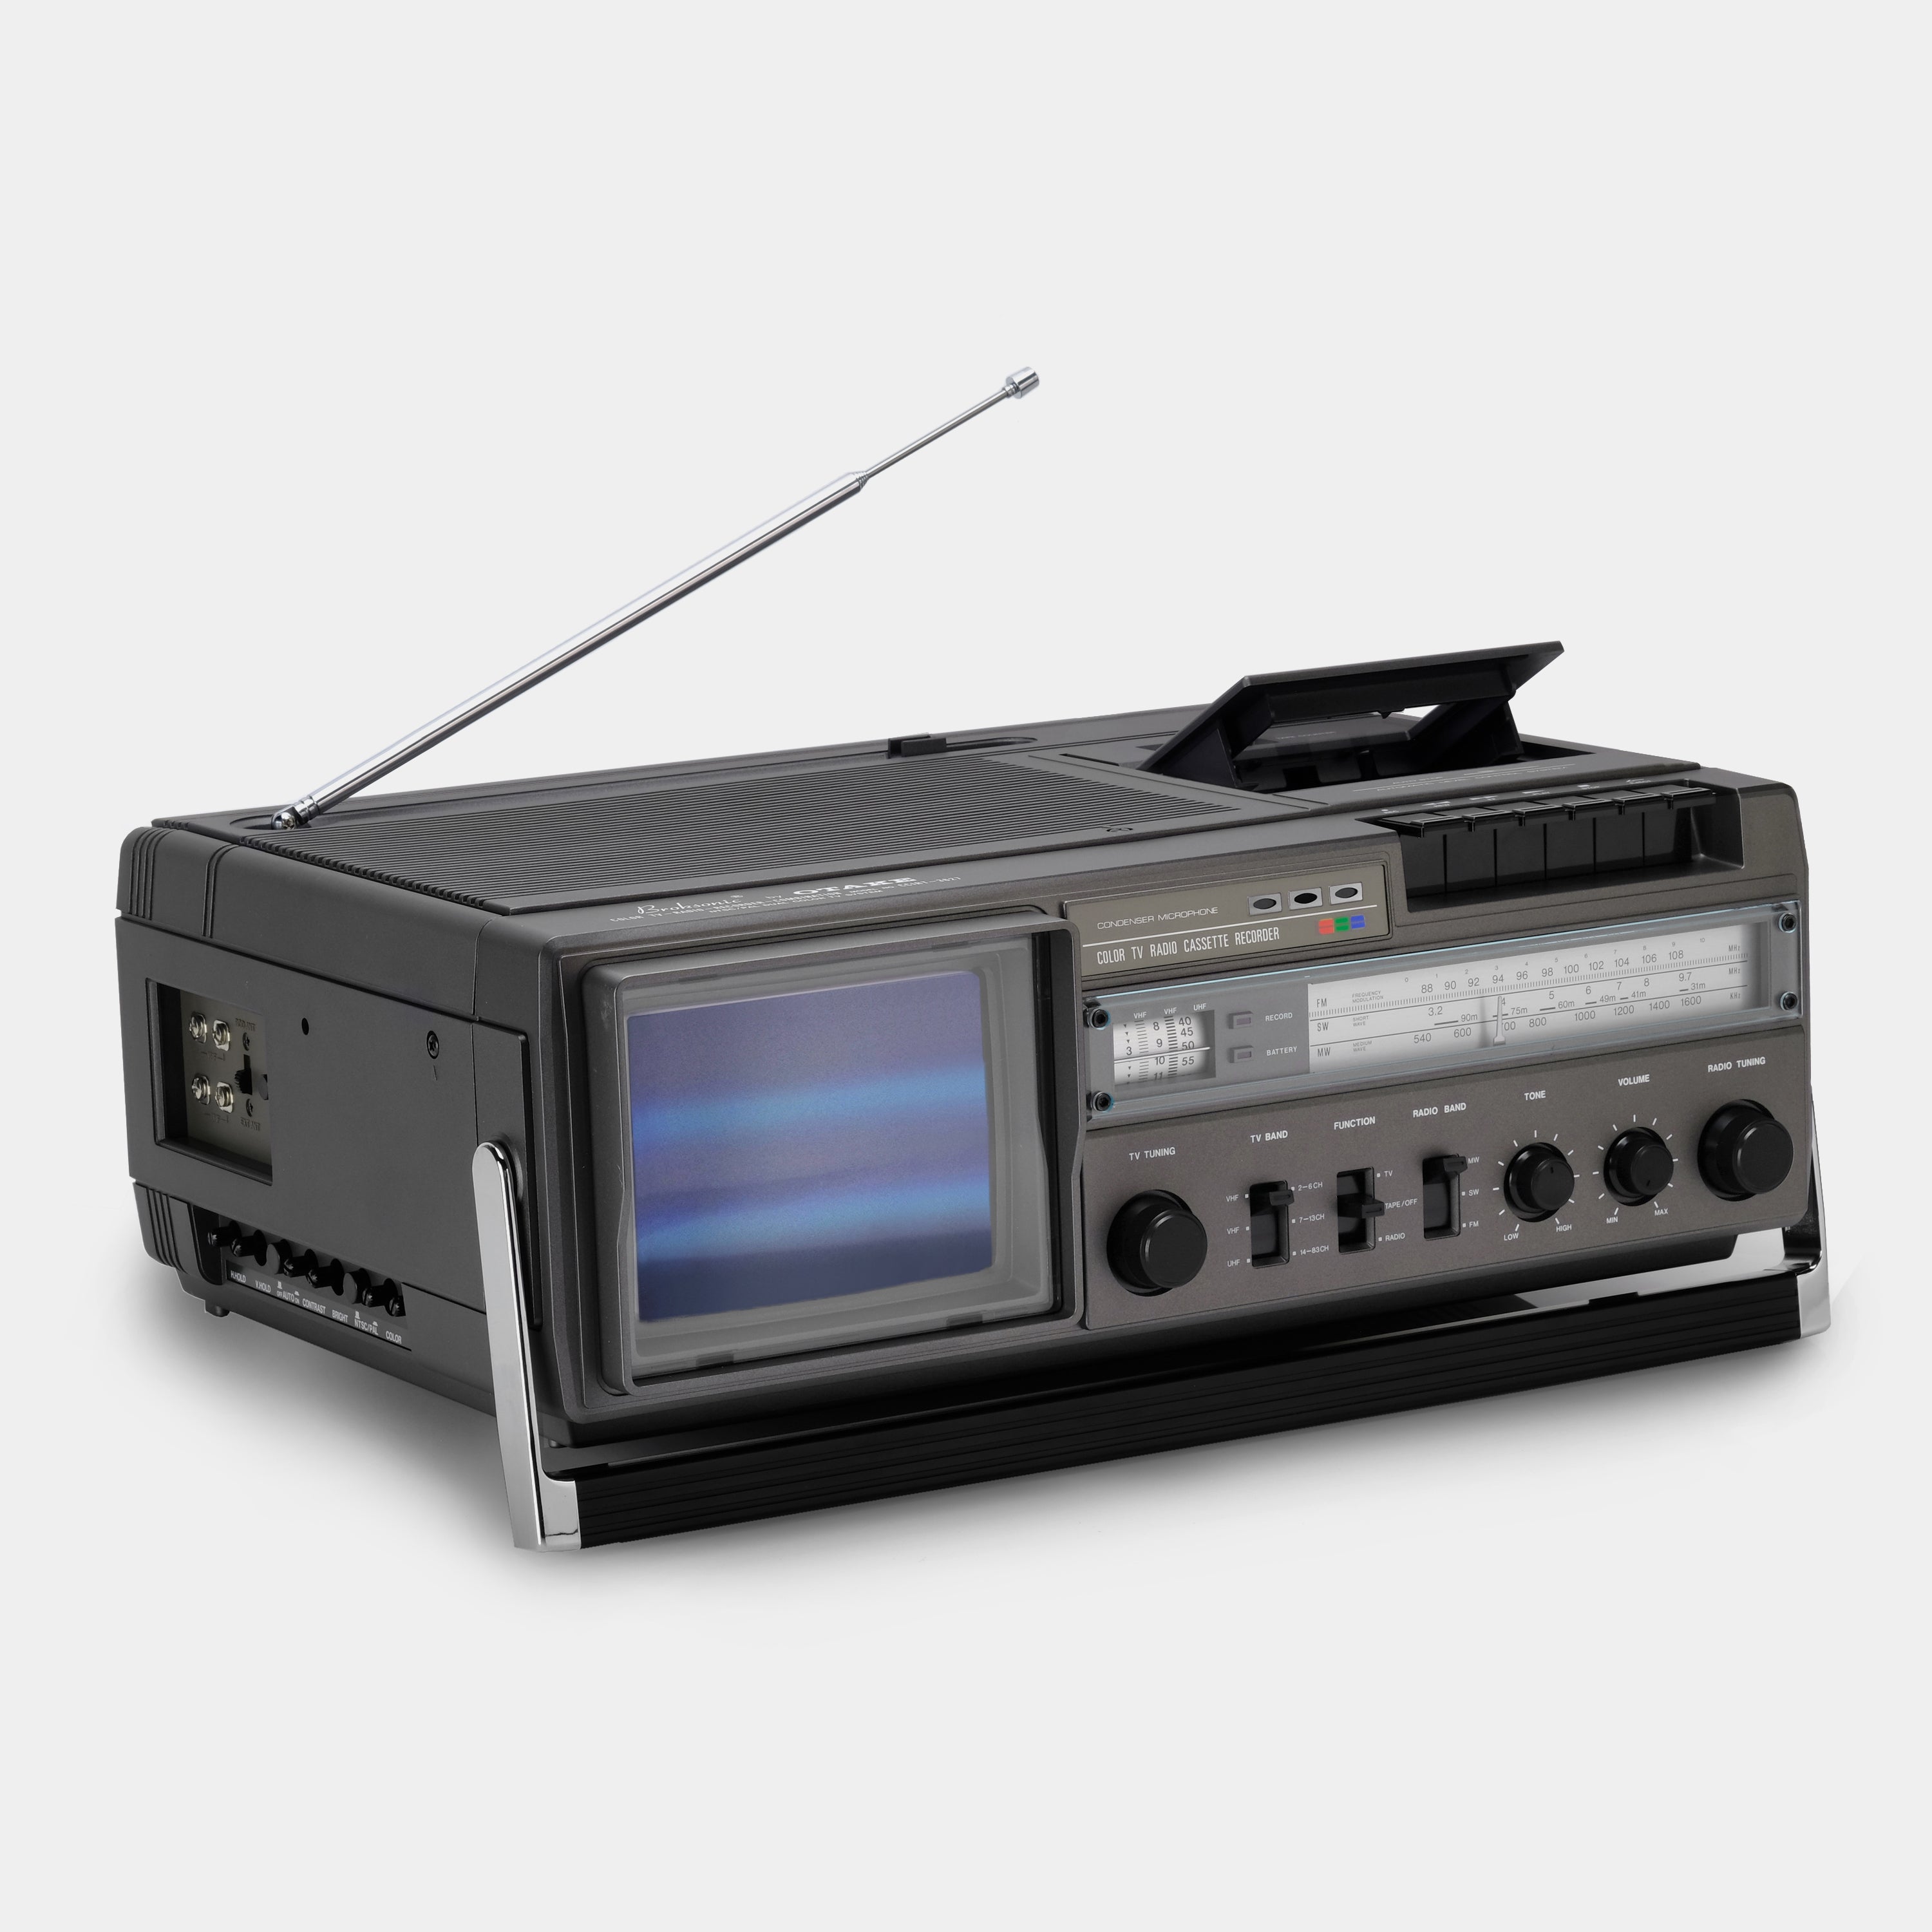 Broksonic by Otake CCIRT-3627 5.5 Inch Color TV with MW/FM/SW Radio an